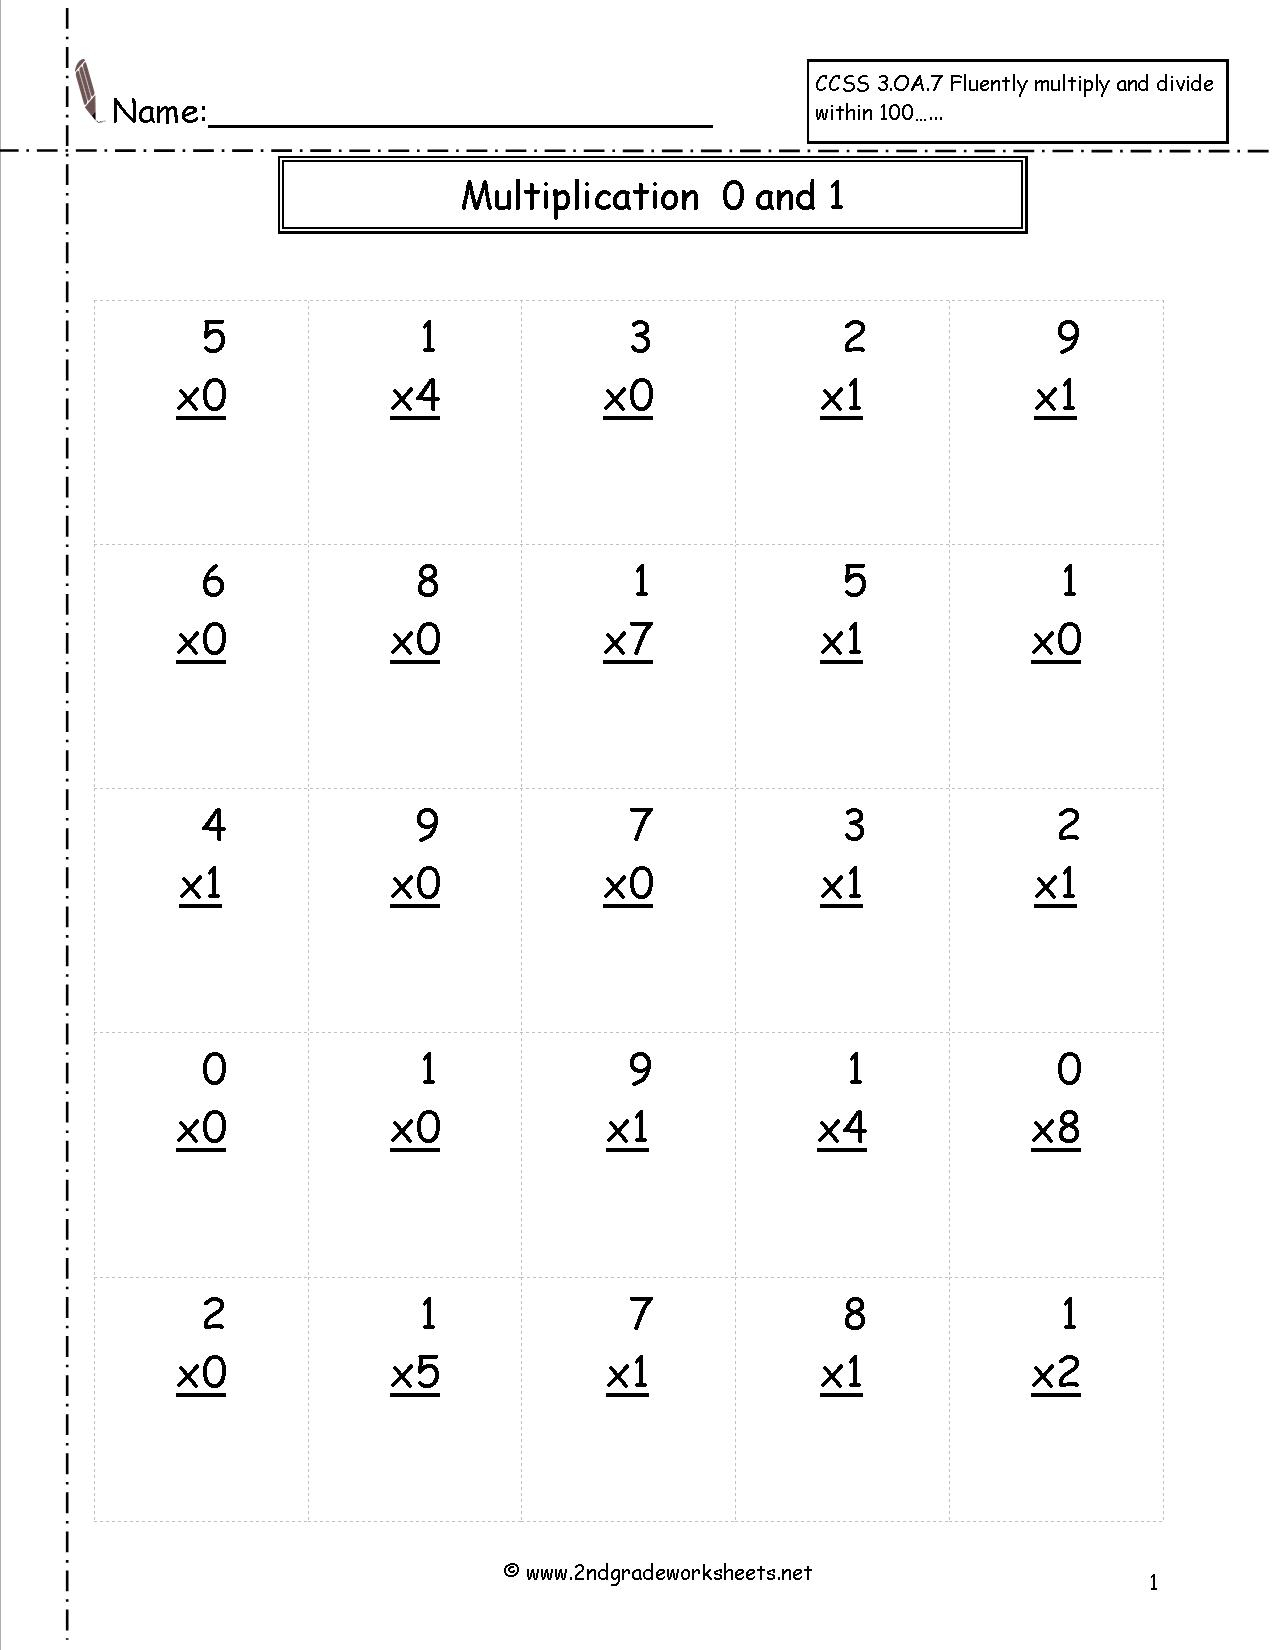 Multiplication Worksheets And Printouts in Printable Worksheets In Multiplication